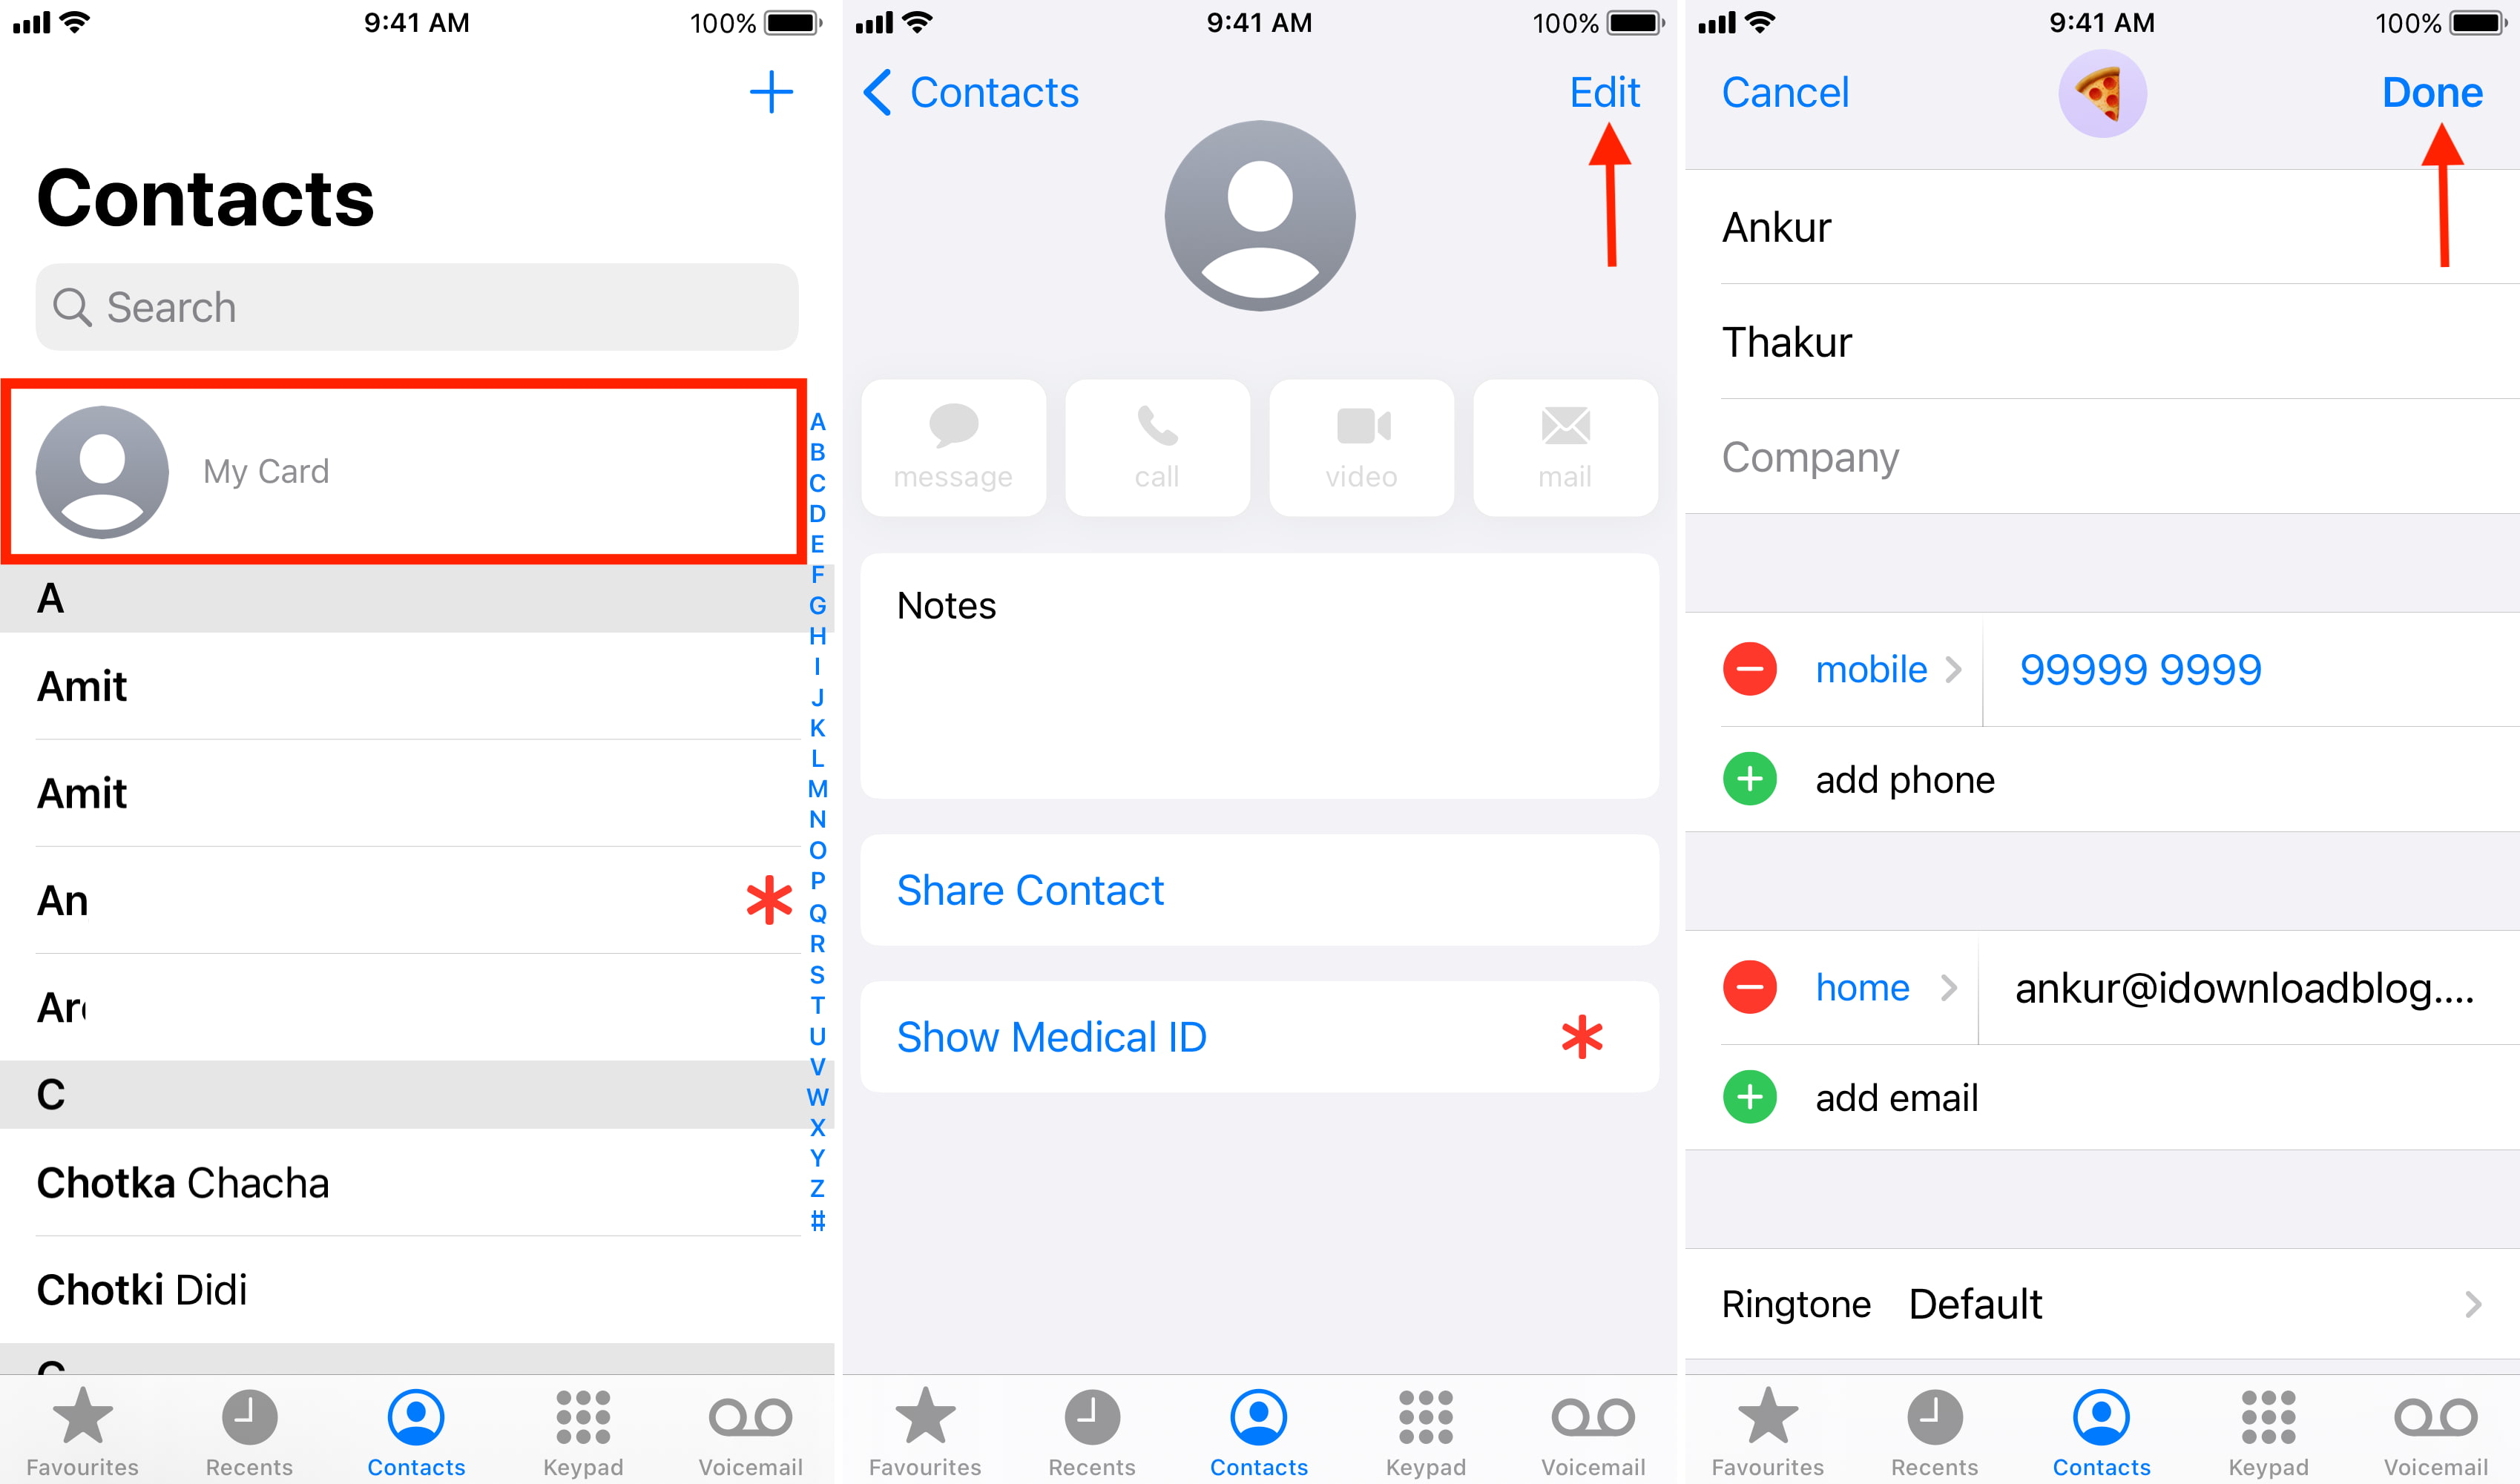 Adding My Card in iPhone Contacts app